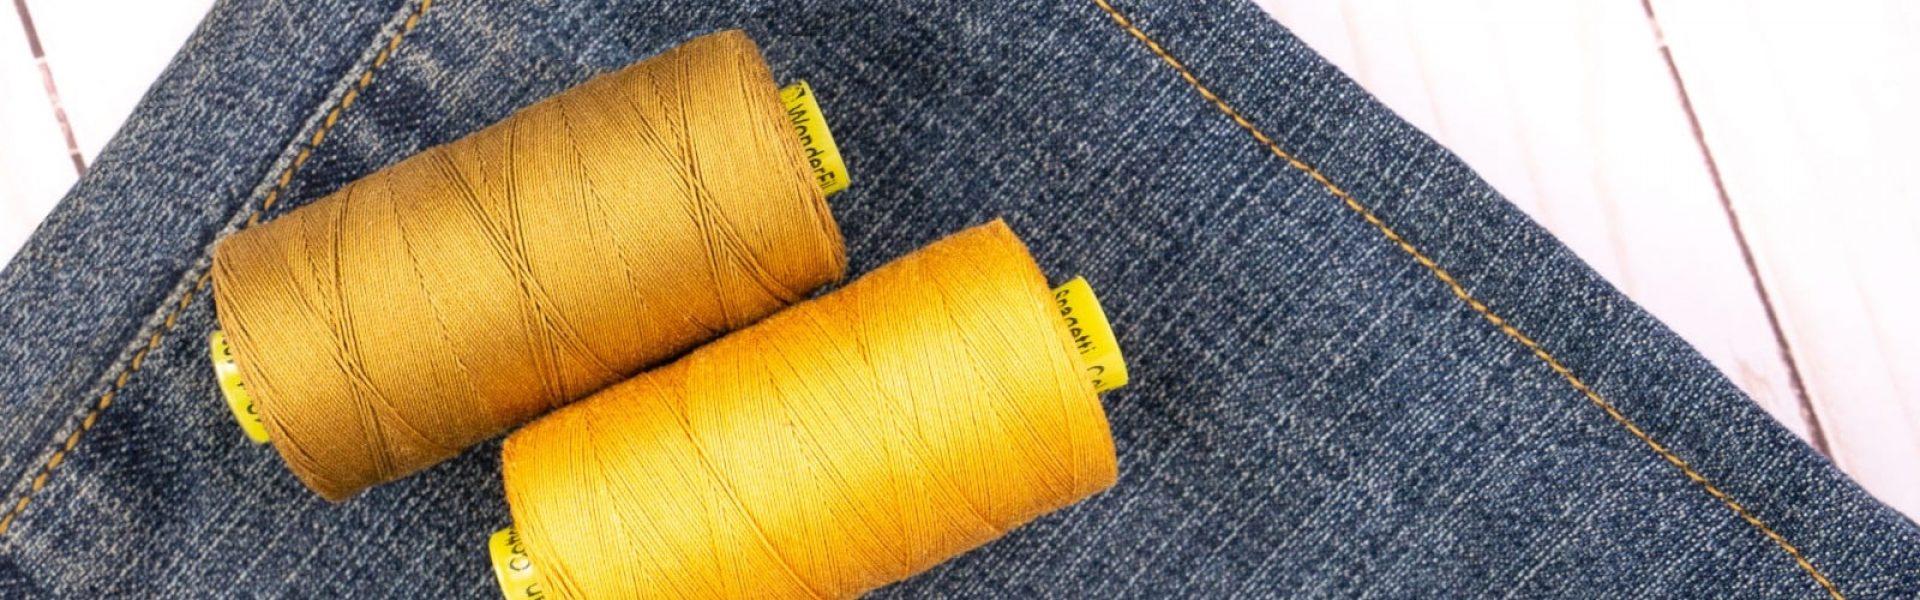 A photo of Spagetti 12wt cotton thread and a pair of hemmed jeans.